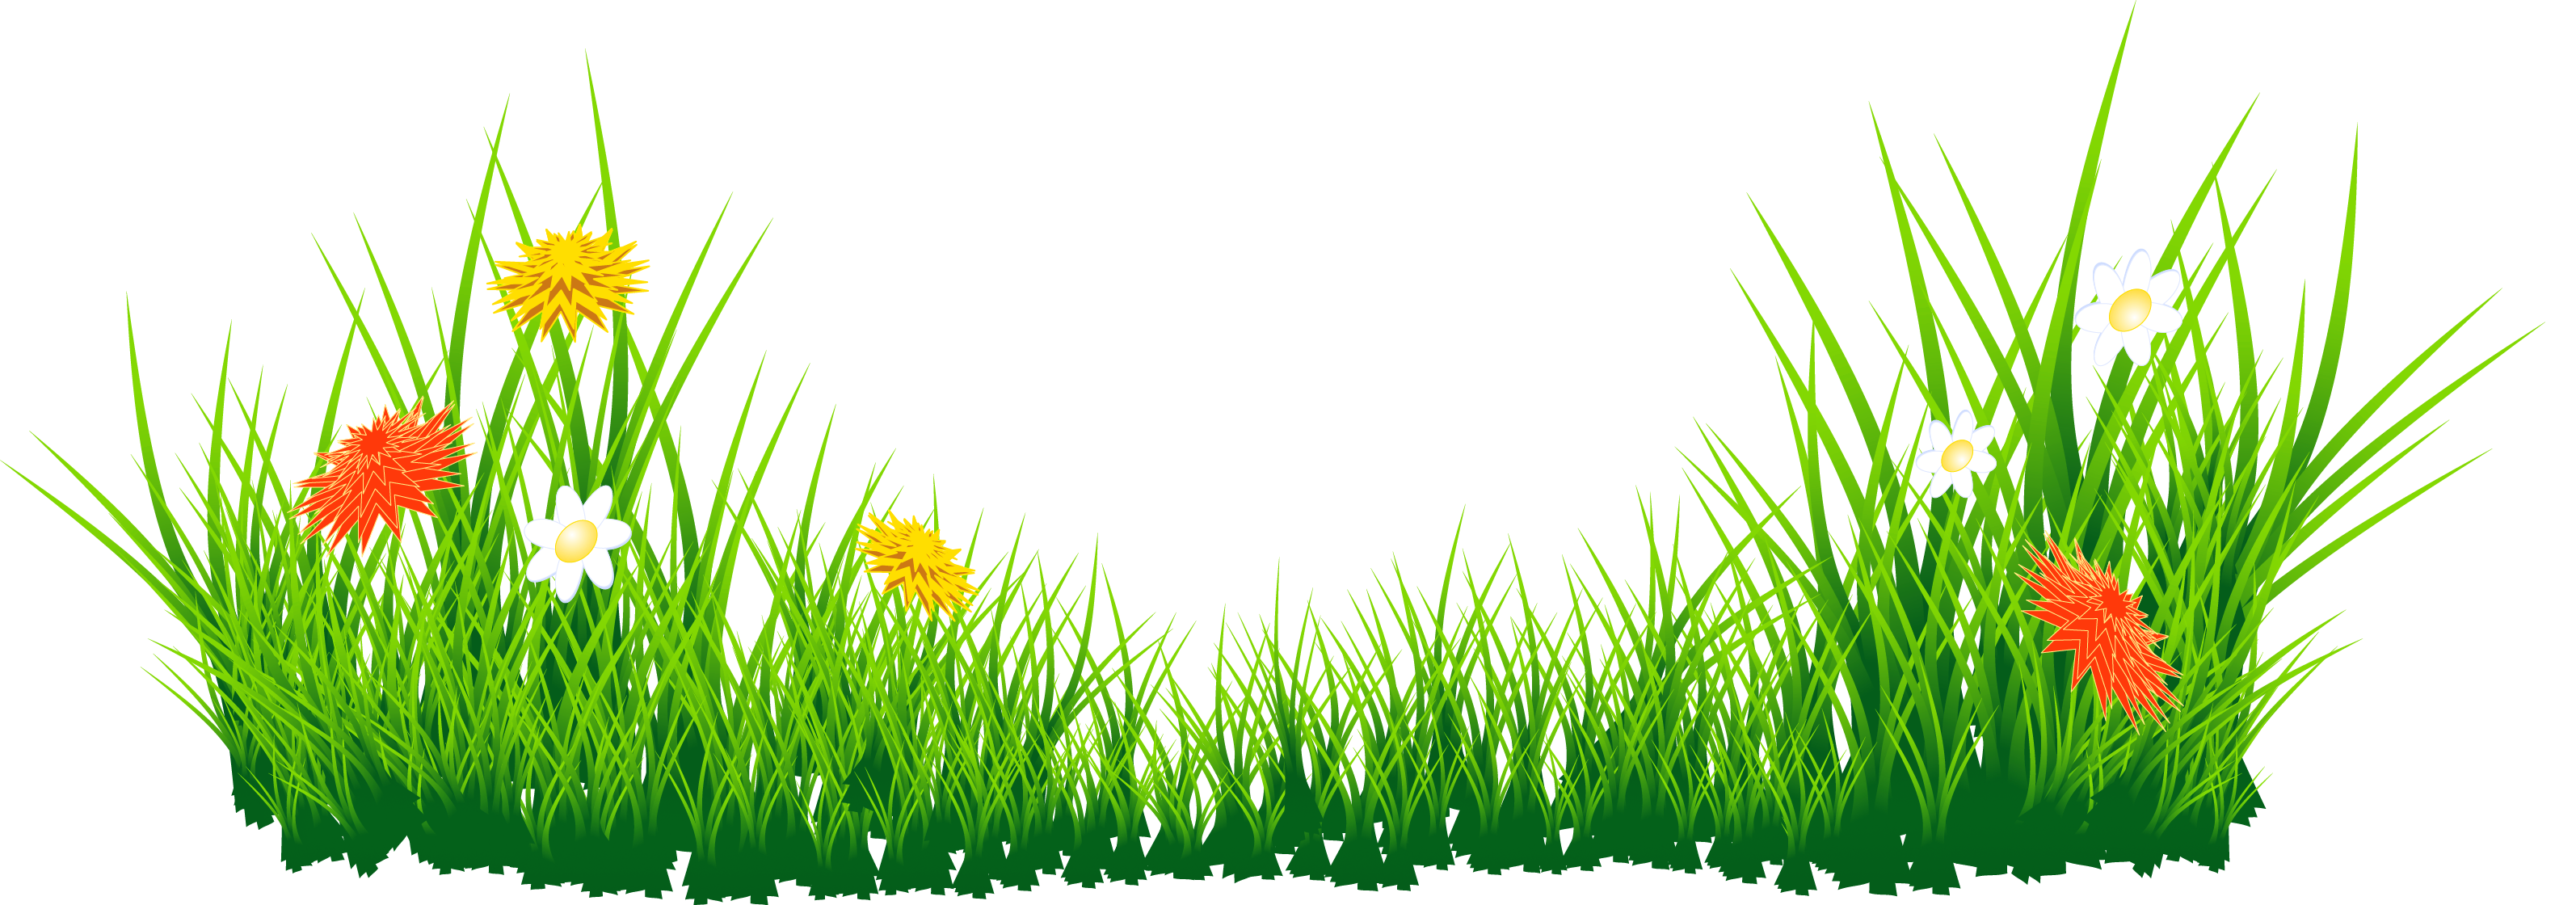 Free grass clip art pictures 3